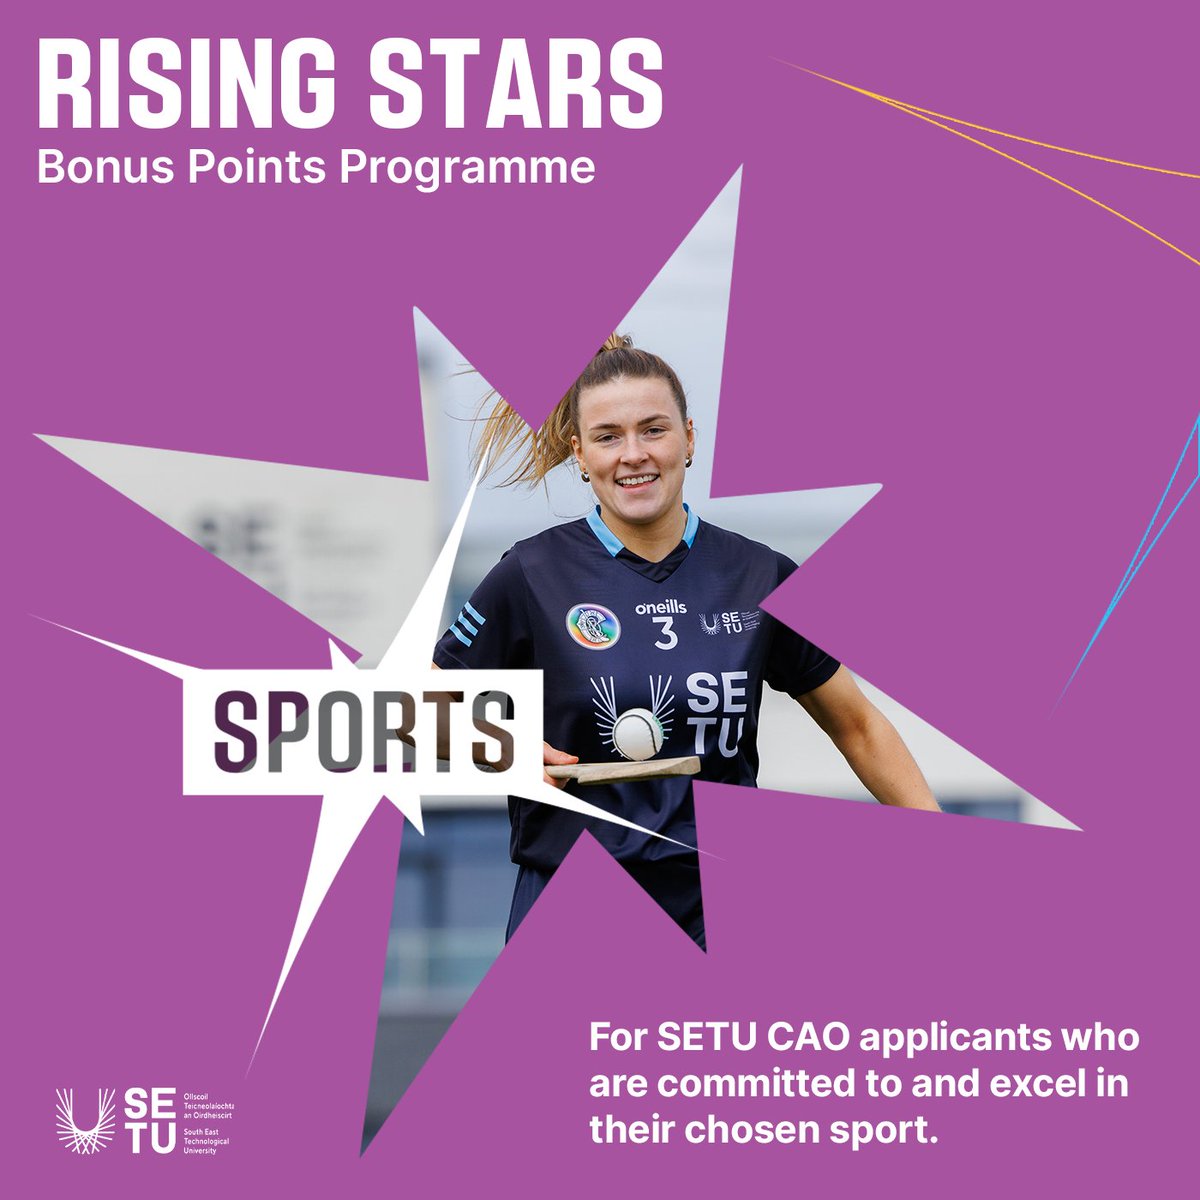 Rising Stars ⭐️ Are you a CAO applicant who has completed, or is currently completing your Leaving Certificate or QQI FE course? You can apply for additional CAO points under the Rising Stars scheme under the sports category. Apply⬇️ setu.ie/study/undergra… Closing date: May 1st